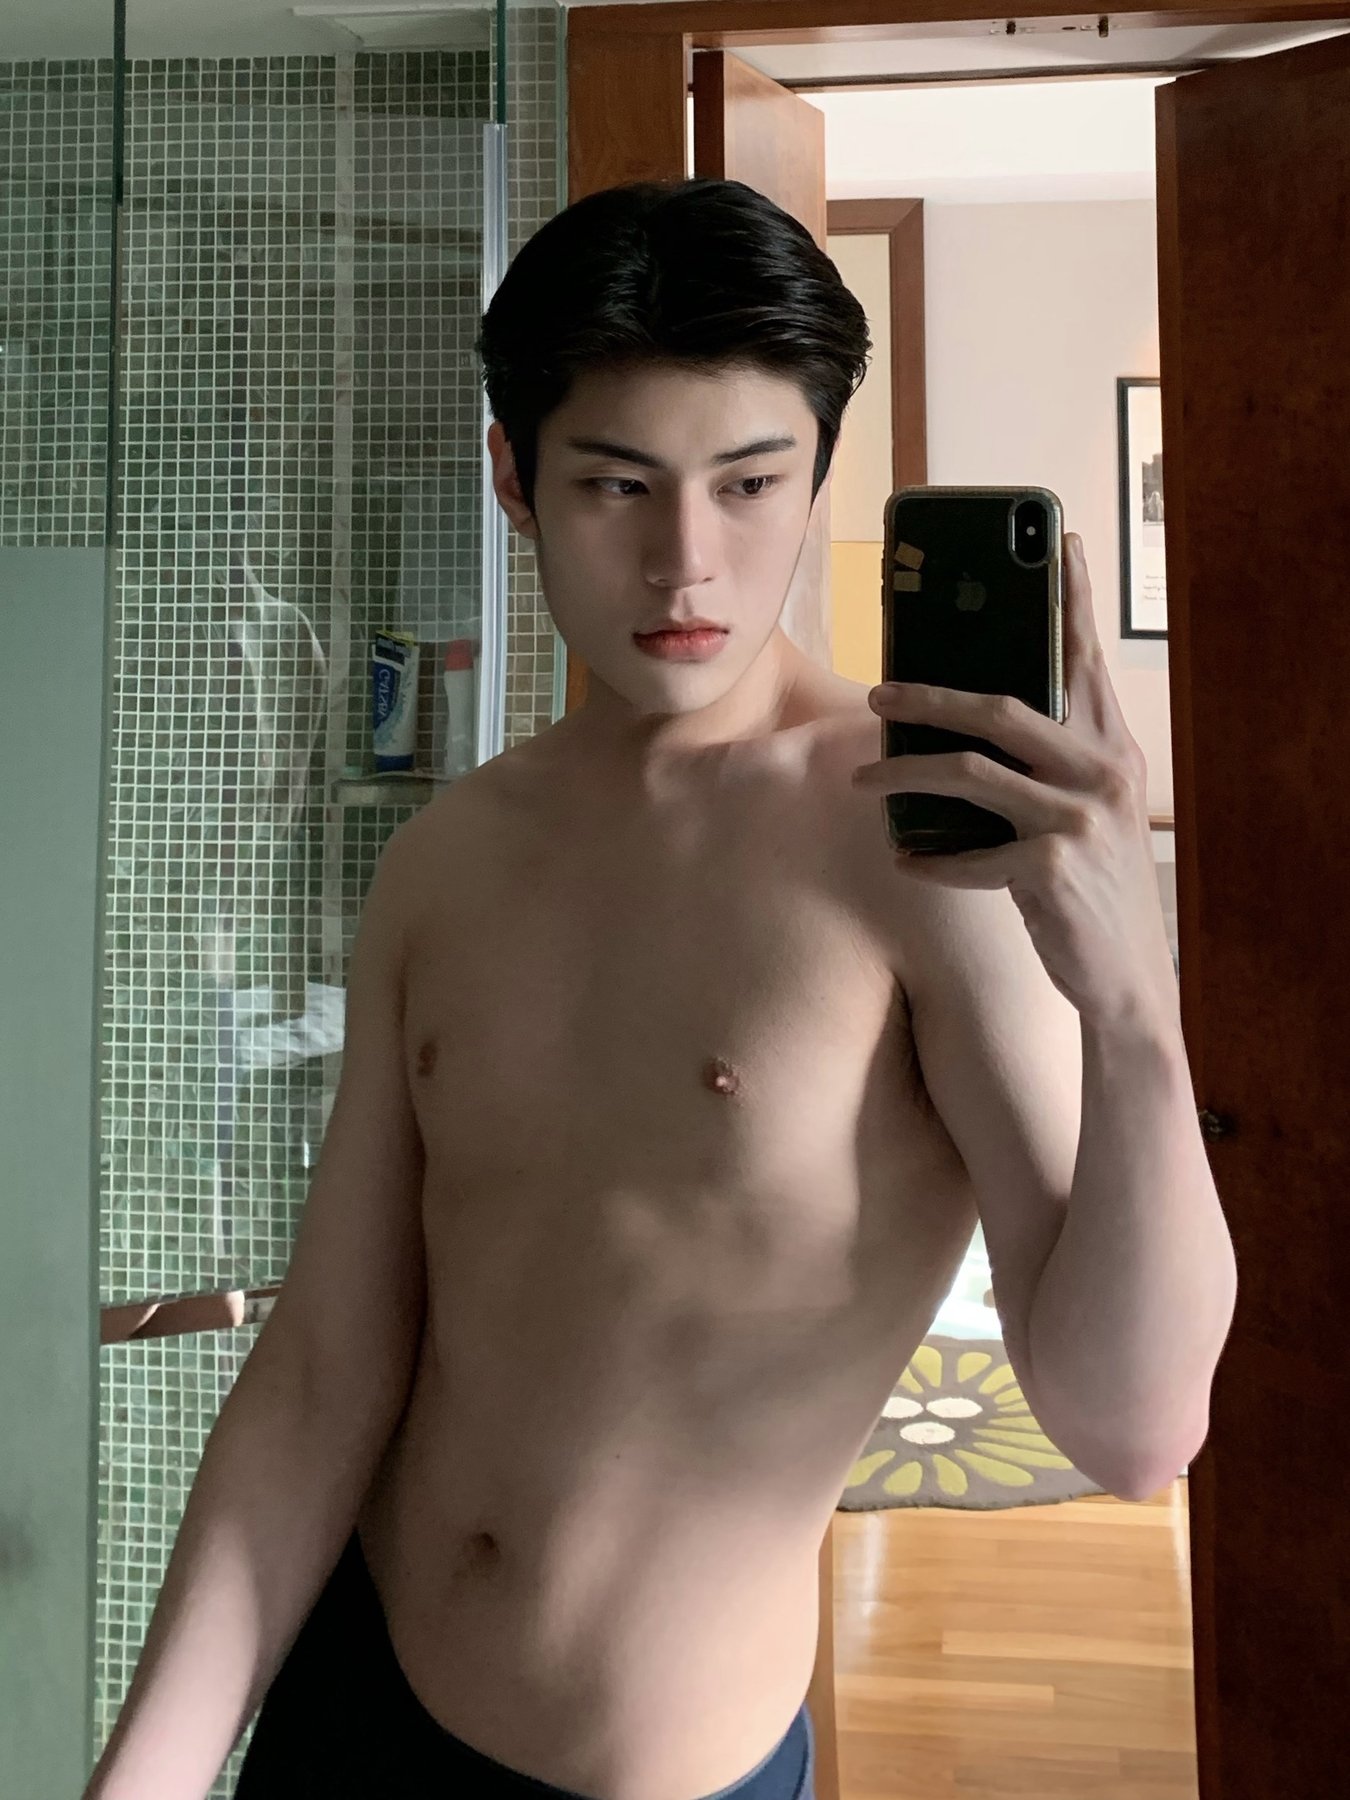 JAPANESE PORN EXPERIENCE, Japanese Male escort in Hong Kong